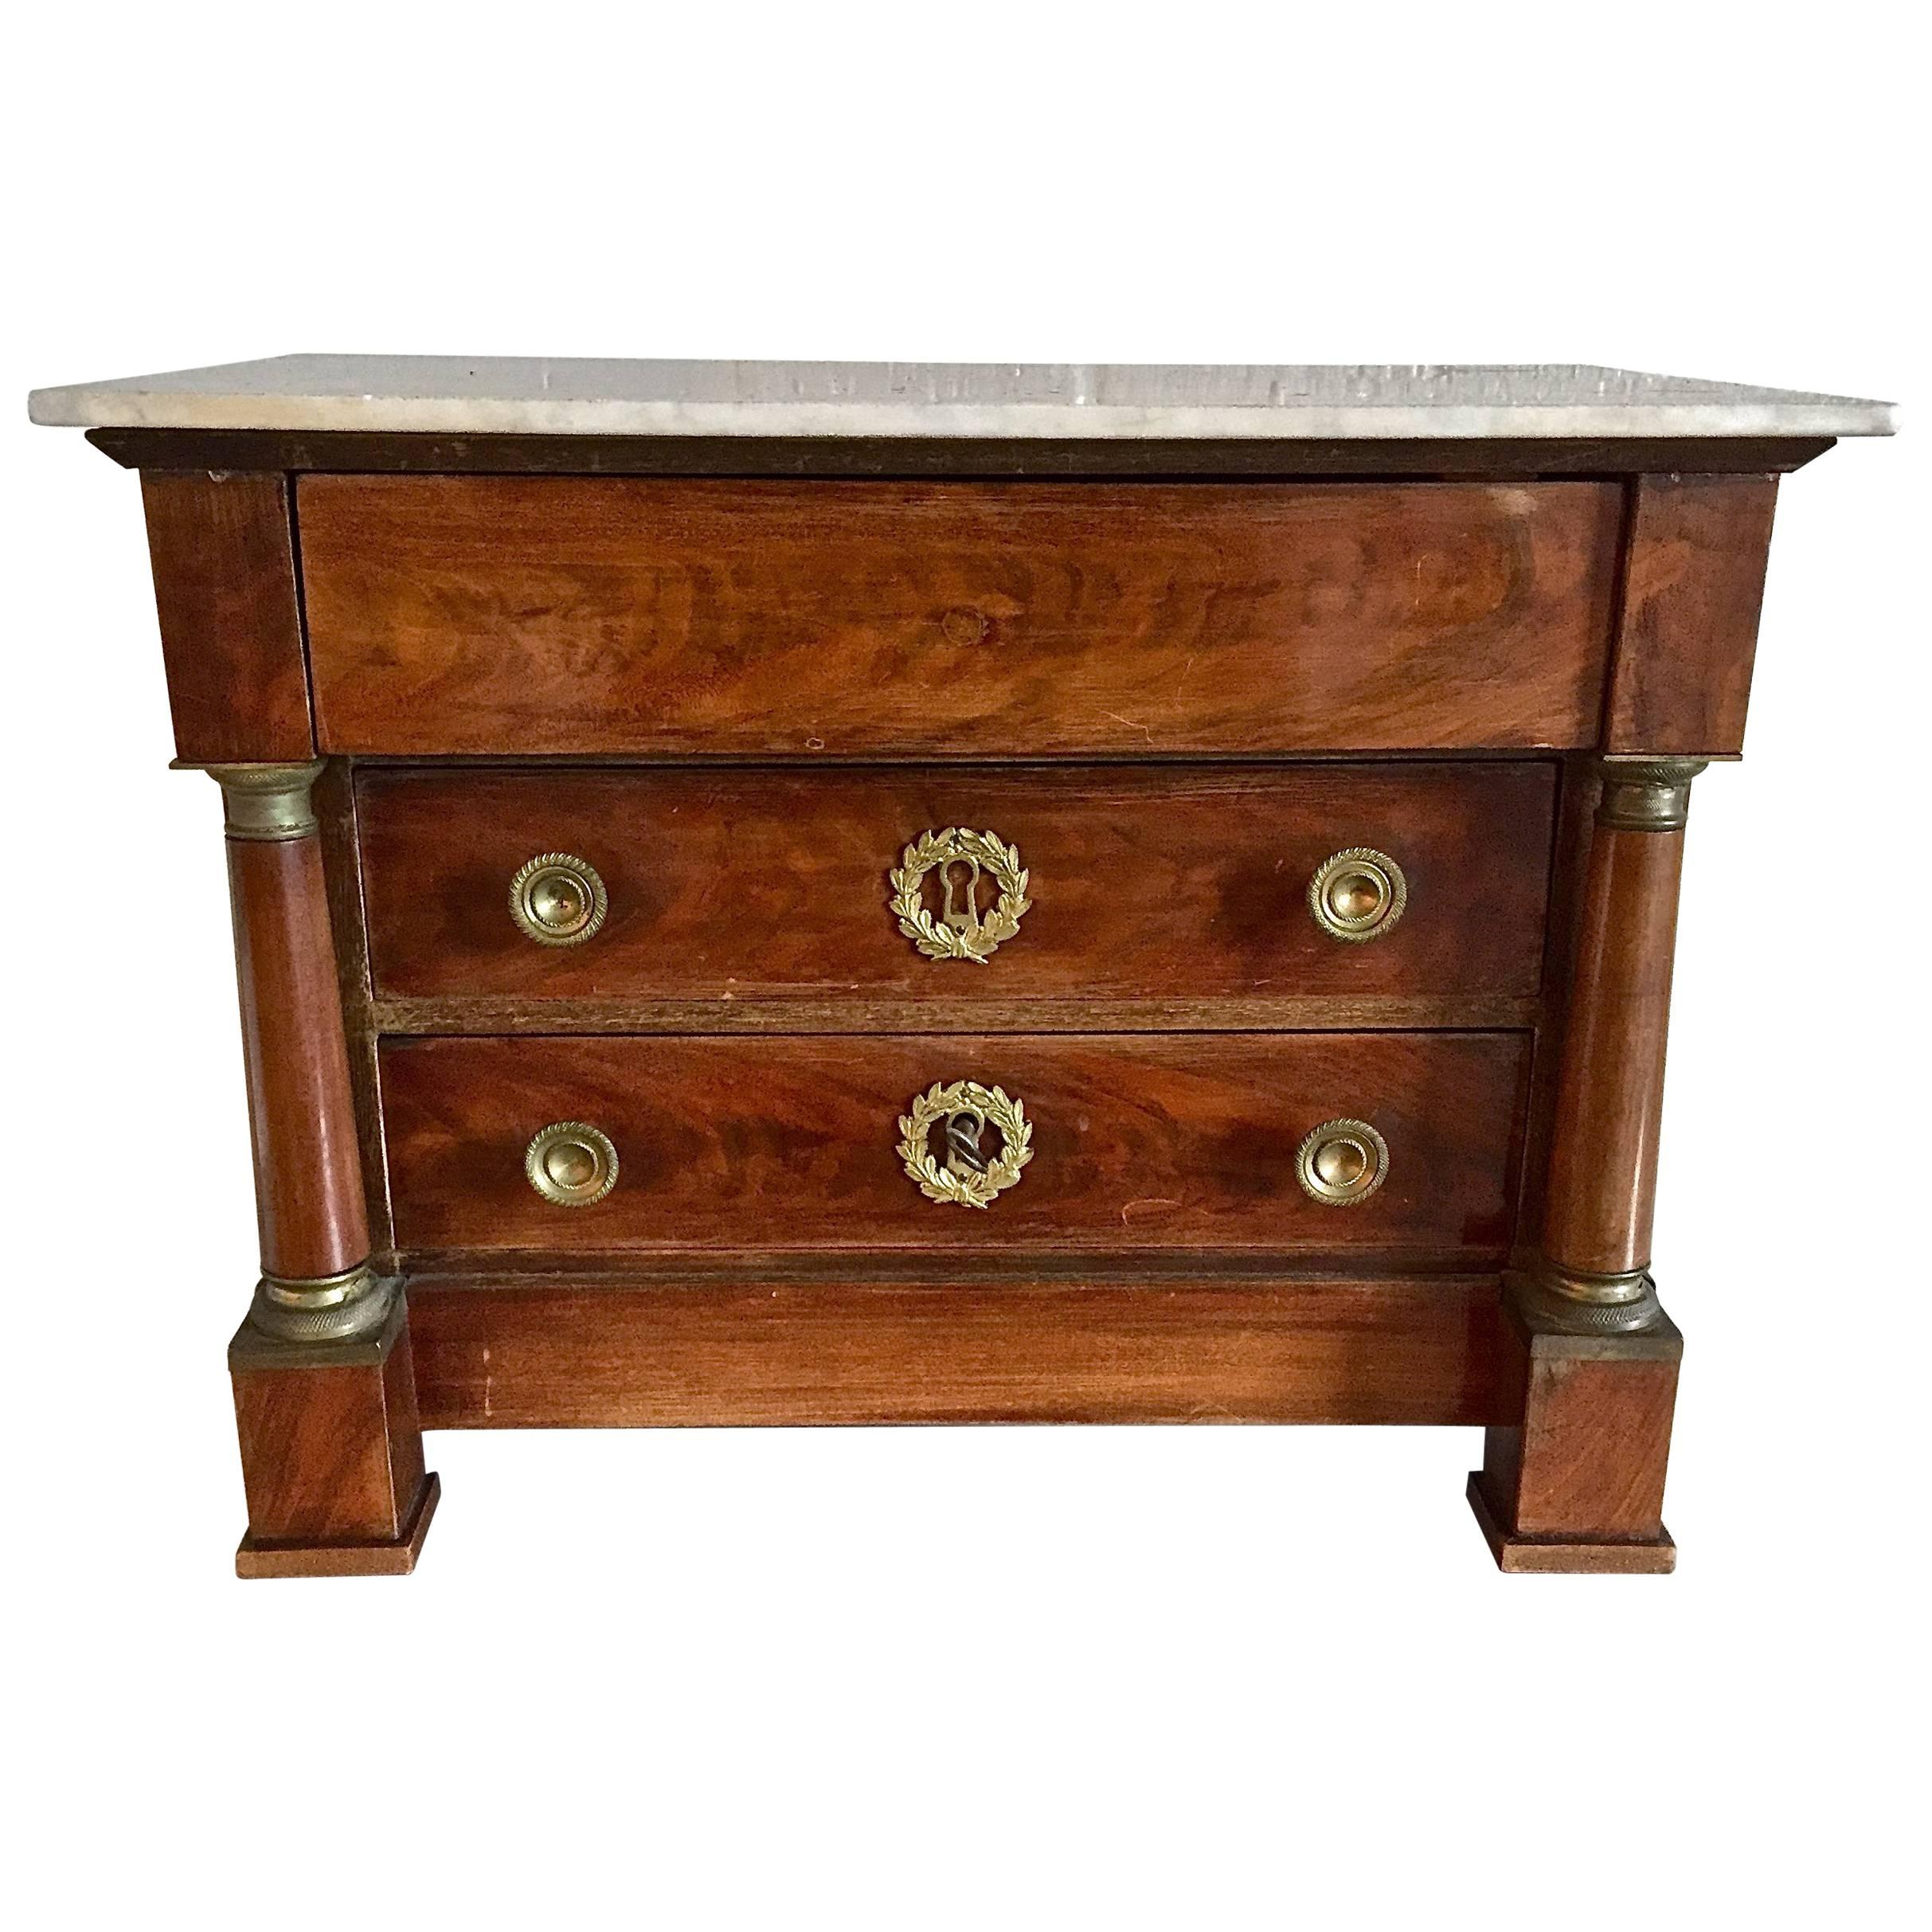 19th Century French Empire Miniature Commode Chest For Sale